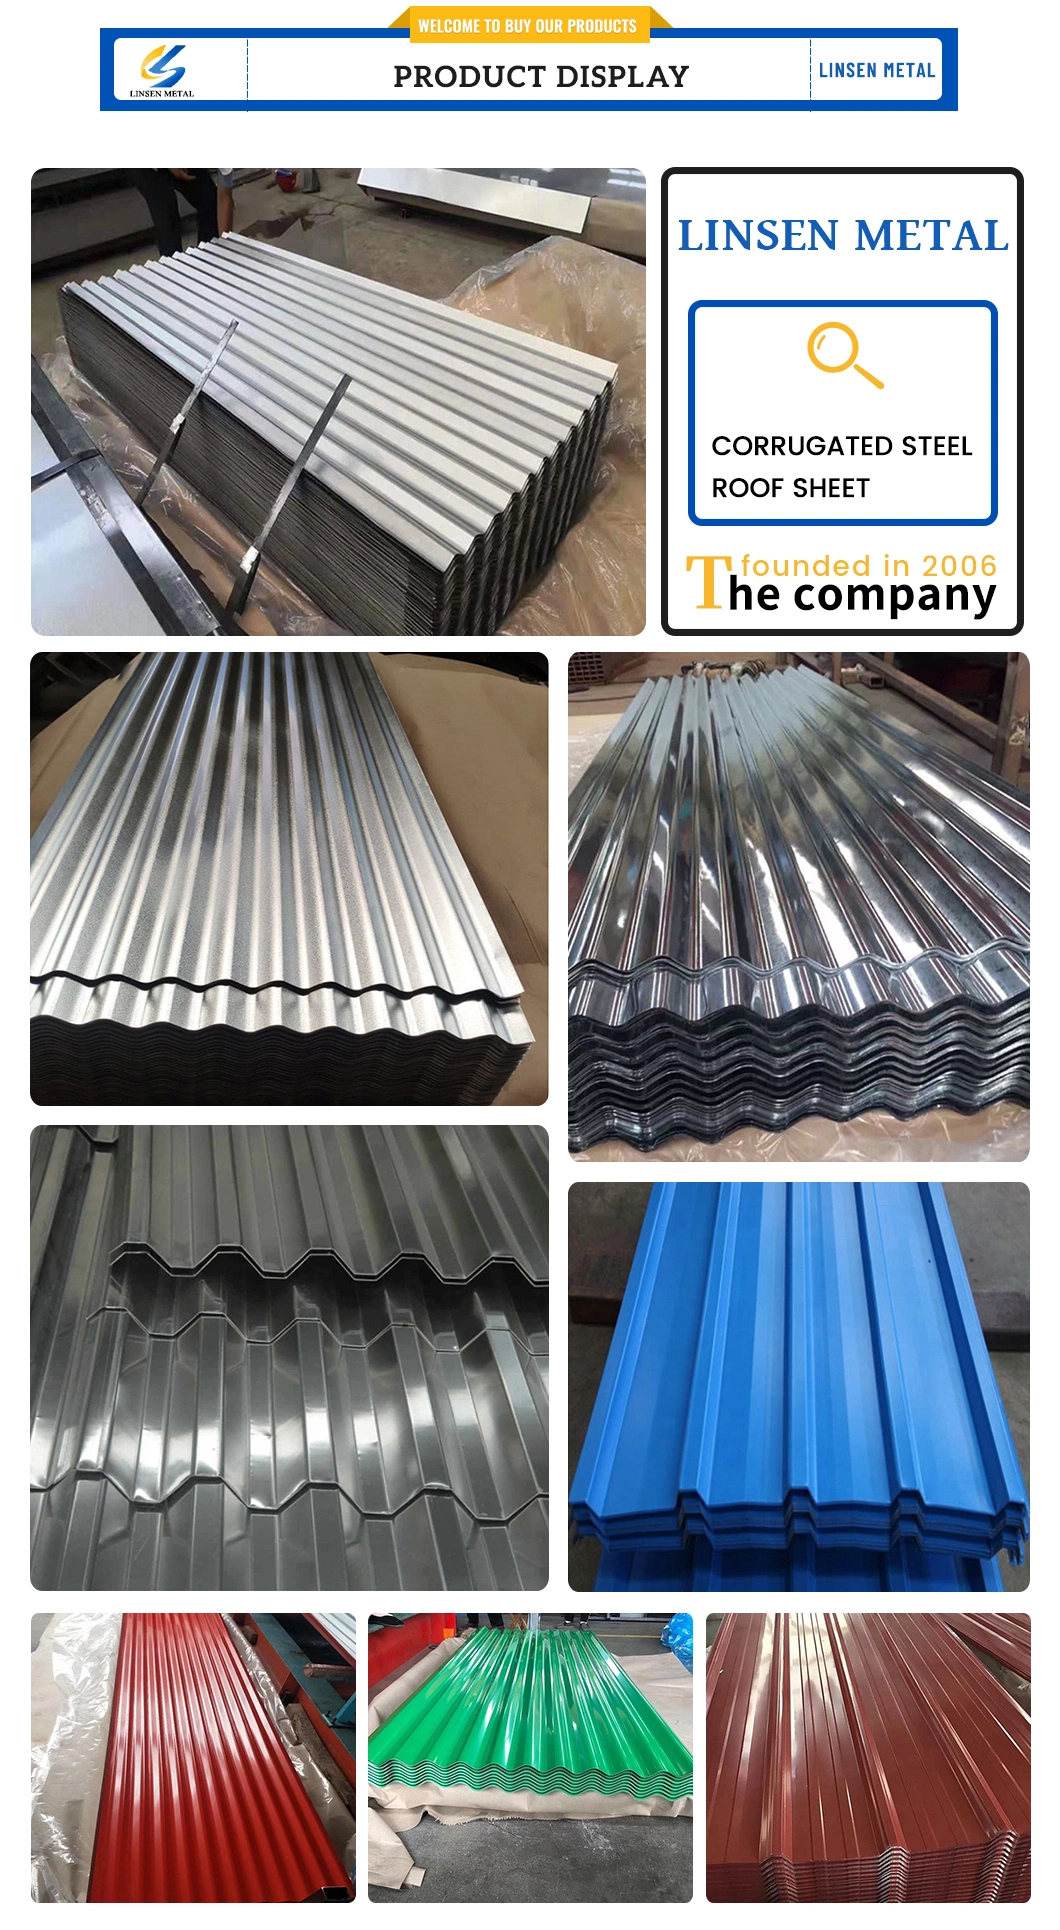 Wholesale Corrugated Metal 0.12mm/0.2mm/0.3mm/0.4mm/0.5mm/0.6mm/0.7mm/0.8mm/0.9mm/1.0mm/1.2mm Galvanized Roofing Sheet for Construction